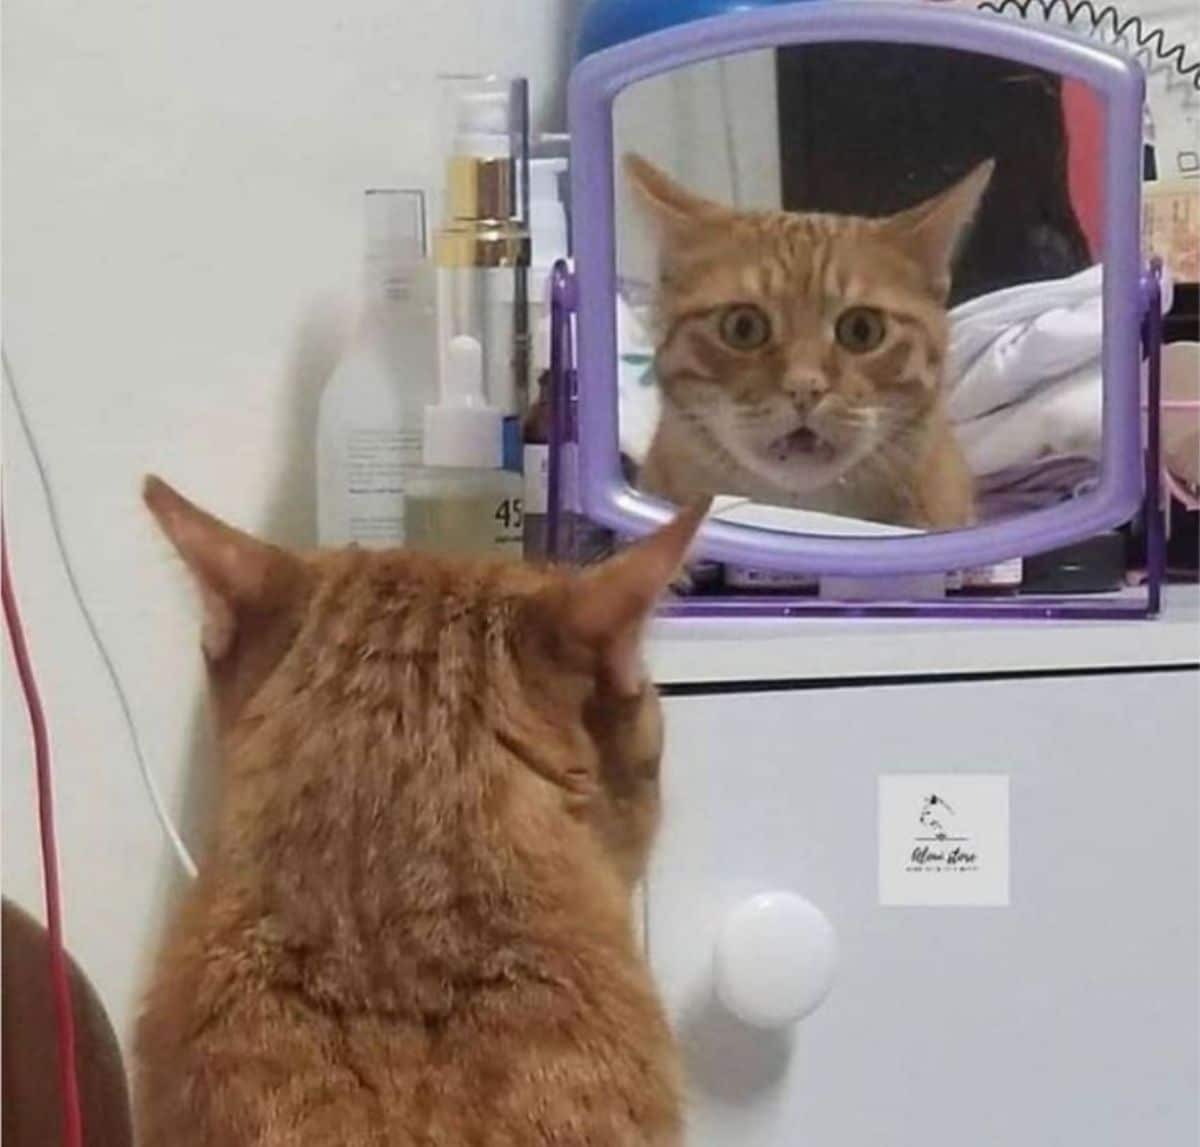 orange cat looking in a purple frame mirror with its mouth open and eyes wide